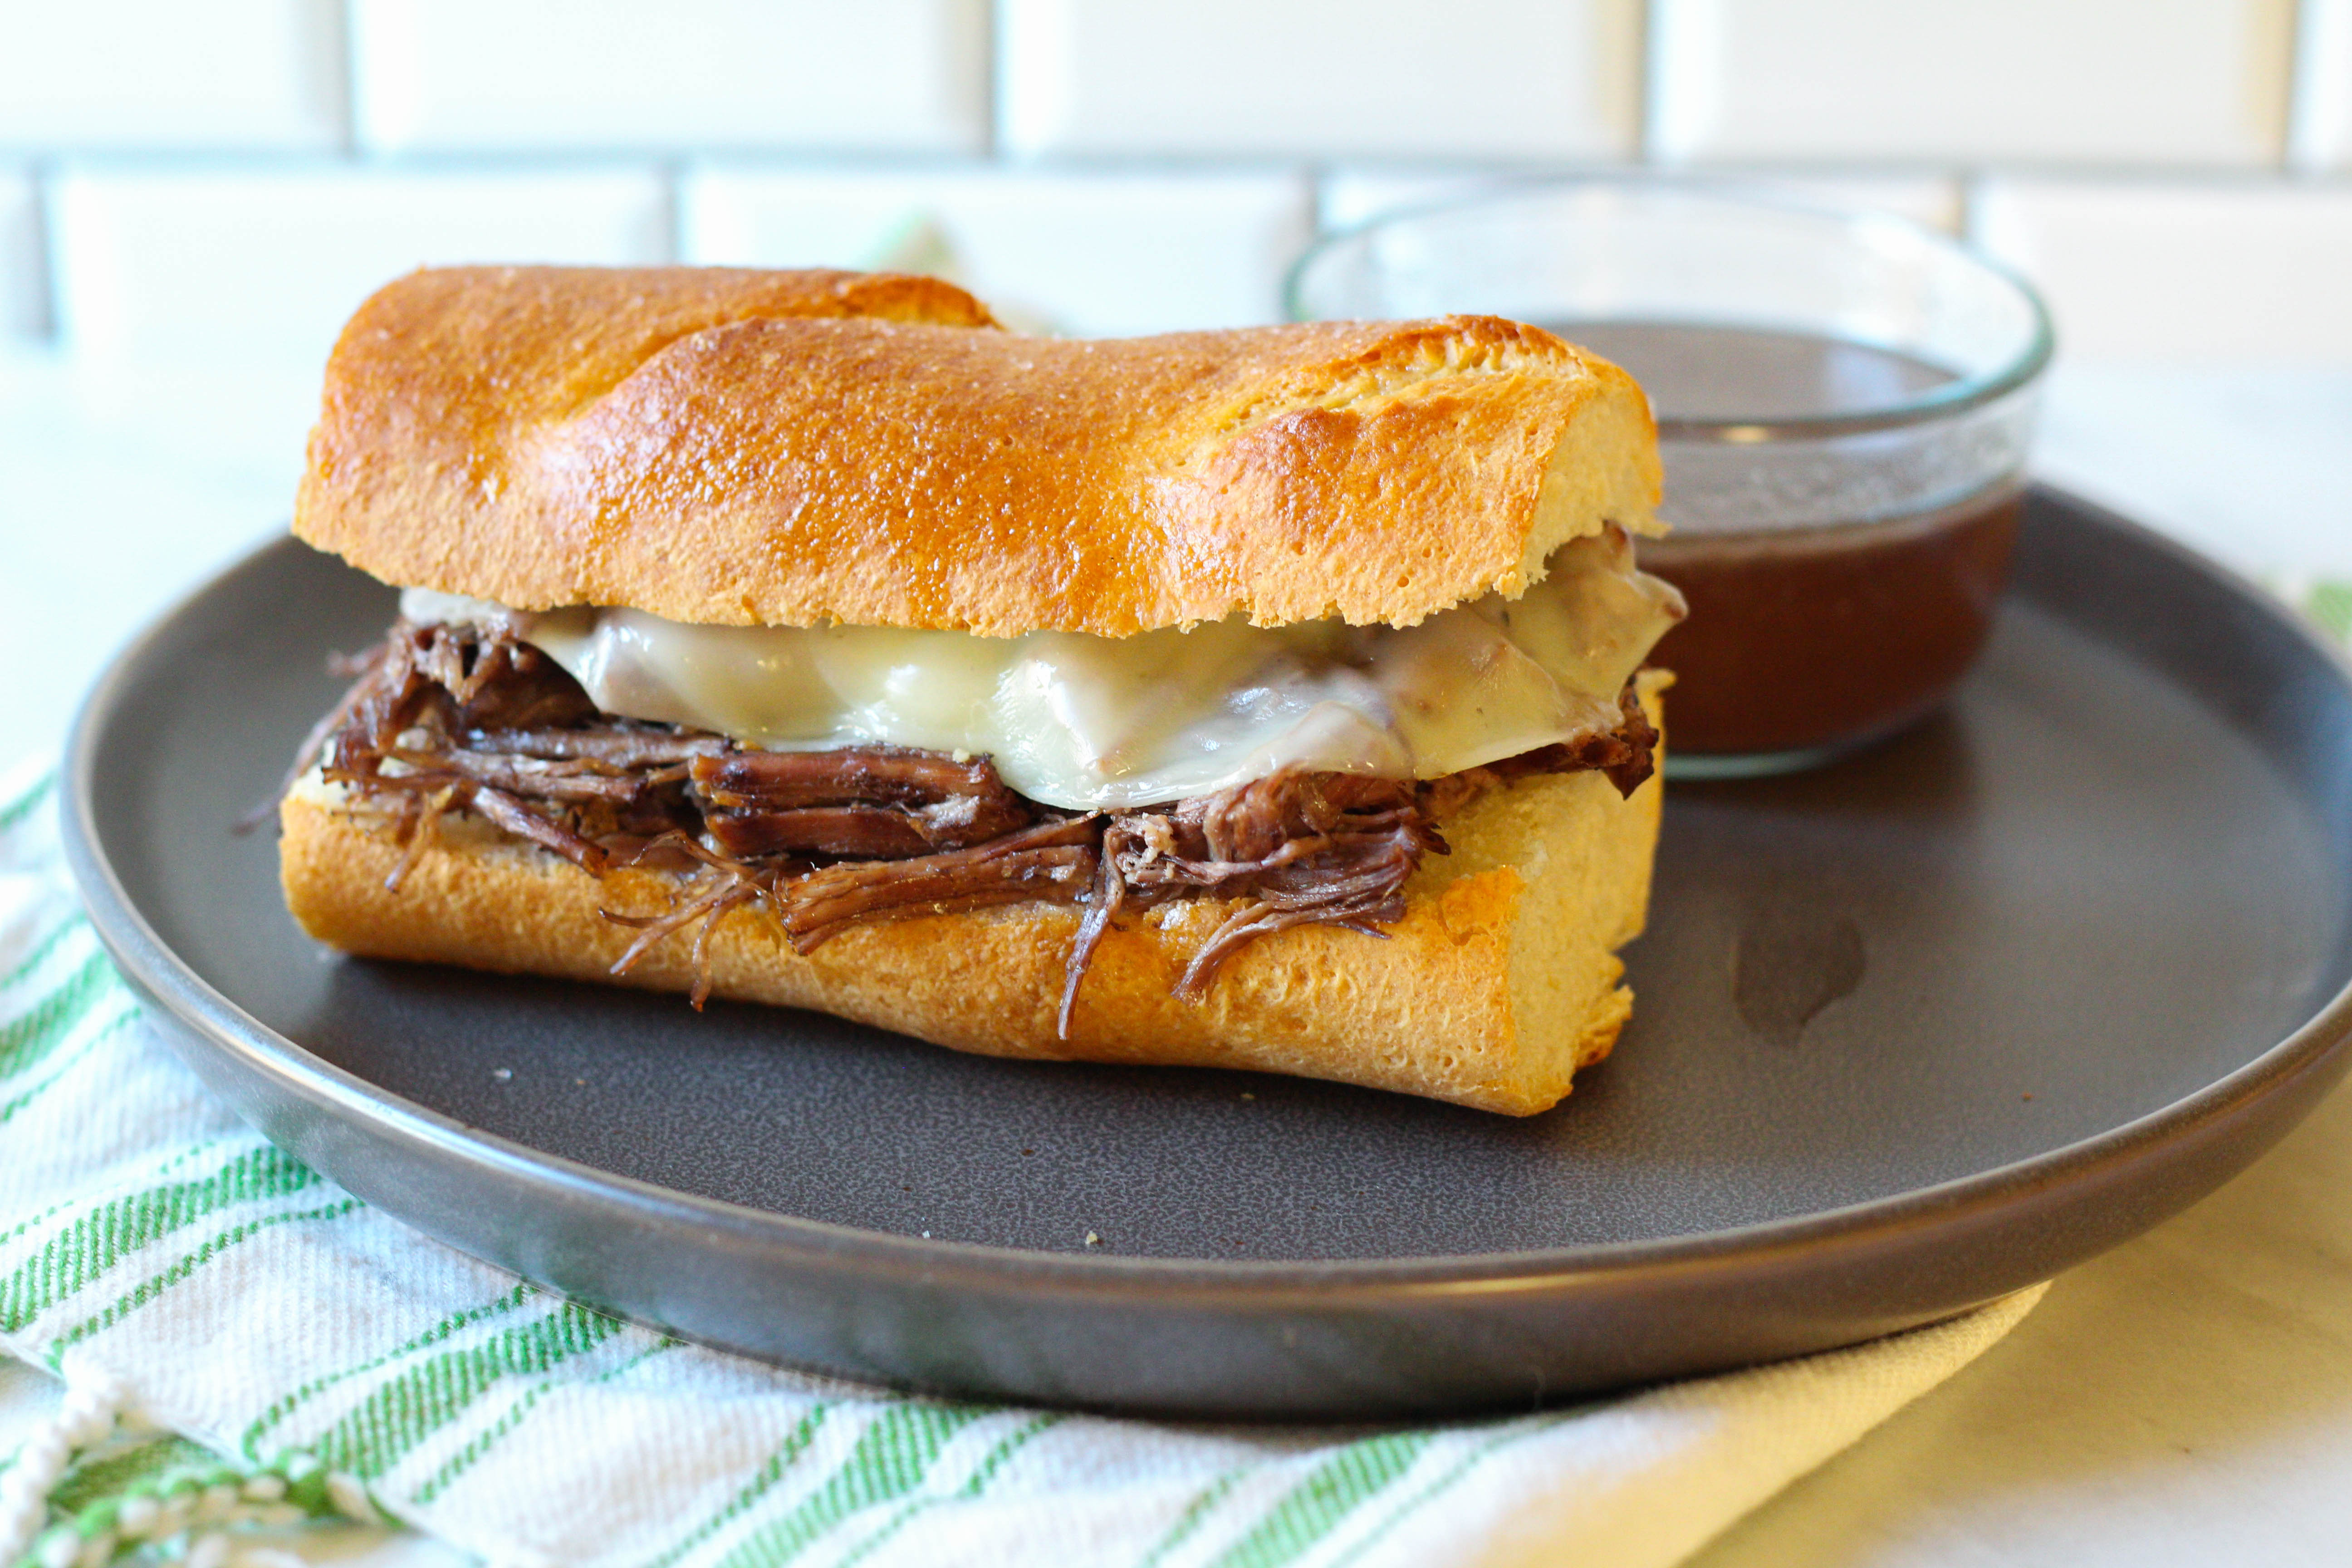 Instant Pot French Dip Sandwiches are a delicious weeknight dinner!